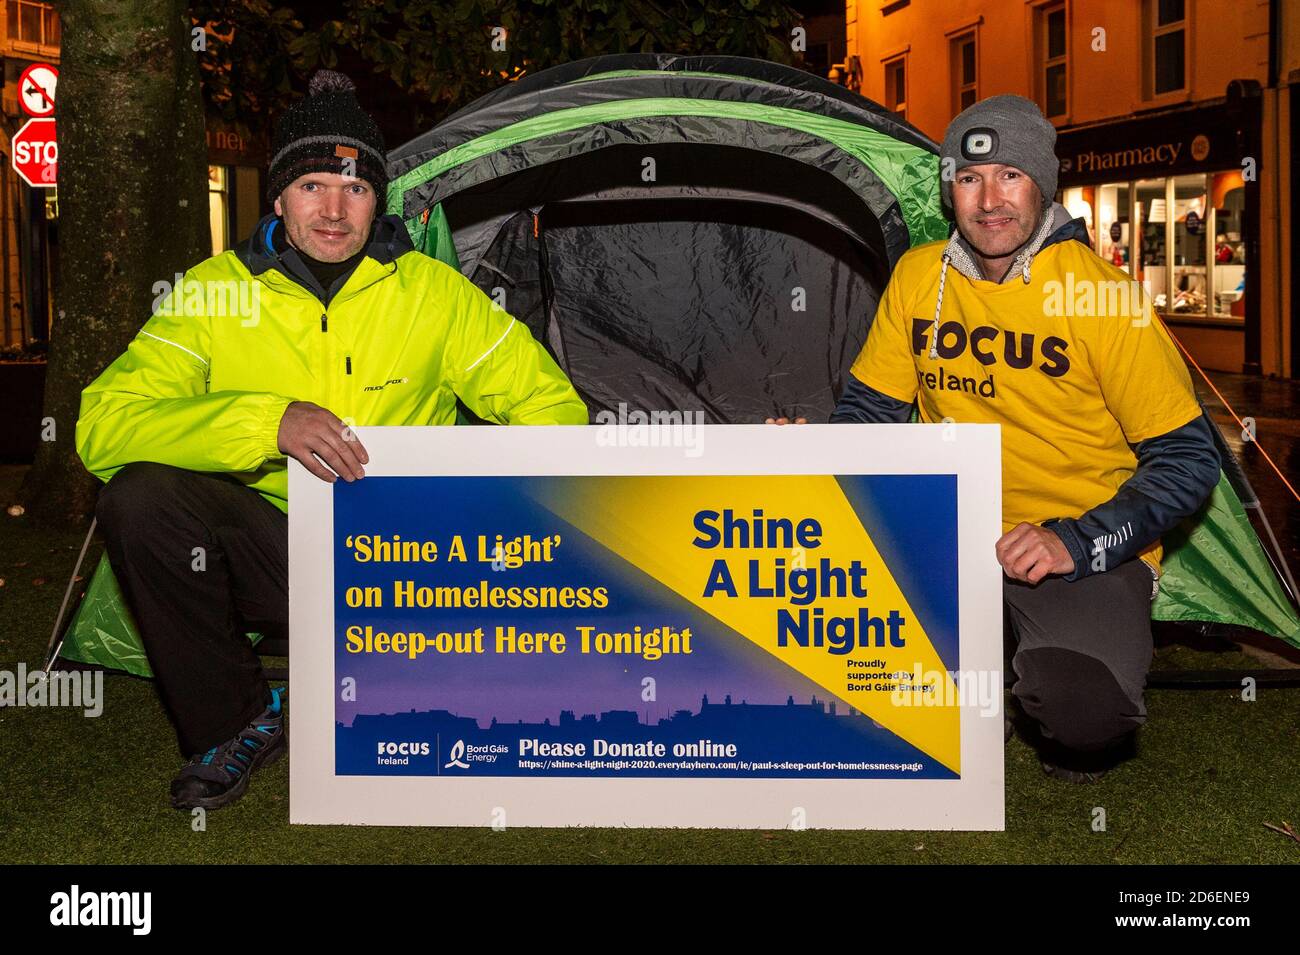 Clonakilty, West Cork, Ireland. 16th Oct, 2020. The annual Focus Ireland 'Shine A Light' sleep out in aid of homeless people is taking place virtually this year. Cllr. Paul Hayes and his brother Kevin are spending the night in a tent in Astna Square, Clonakilty. Paul and his brother will be sleeping out until 7am on Saturday morning and hope to have a full bucket of donations. Credit: AG News/Alamy Live News Stock Photo